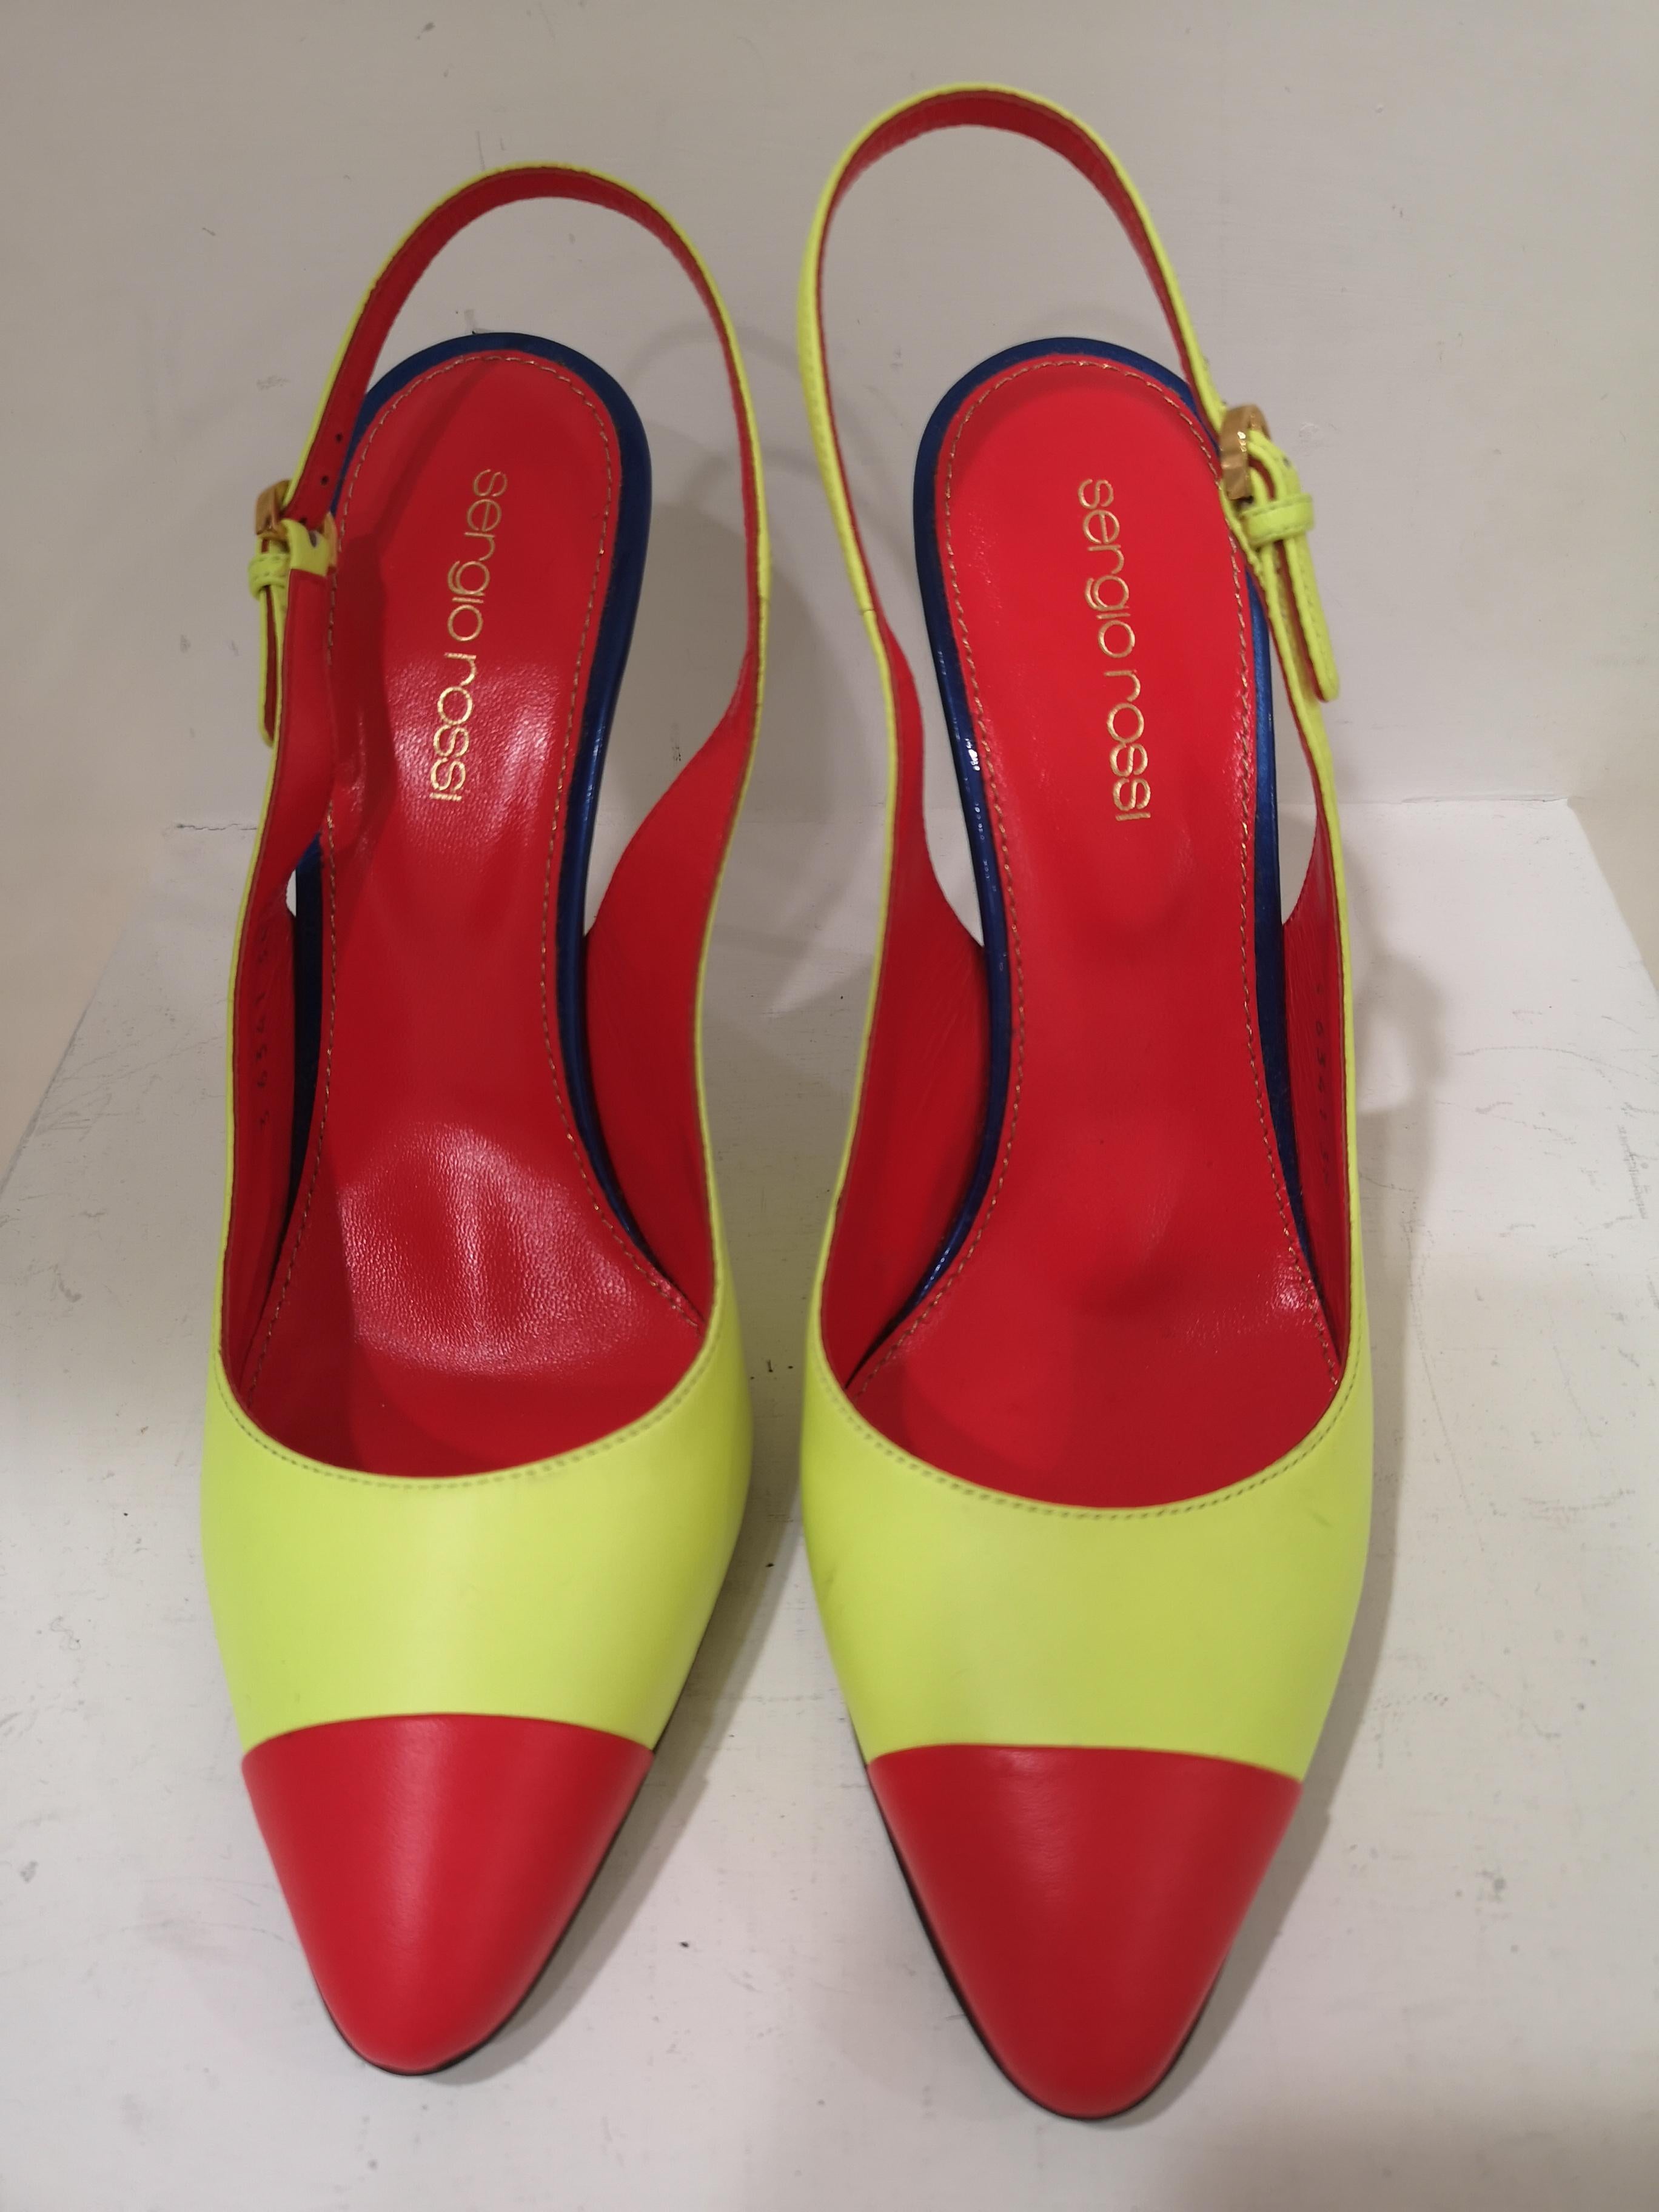 Sergio Rossi Red Blue Fluo Yellow Decollete
totally made in italy in size 39